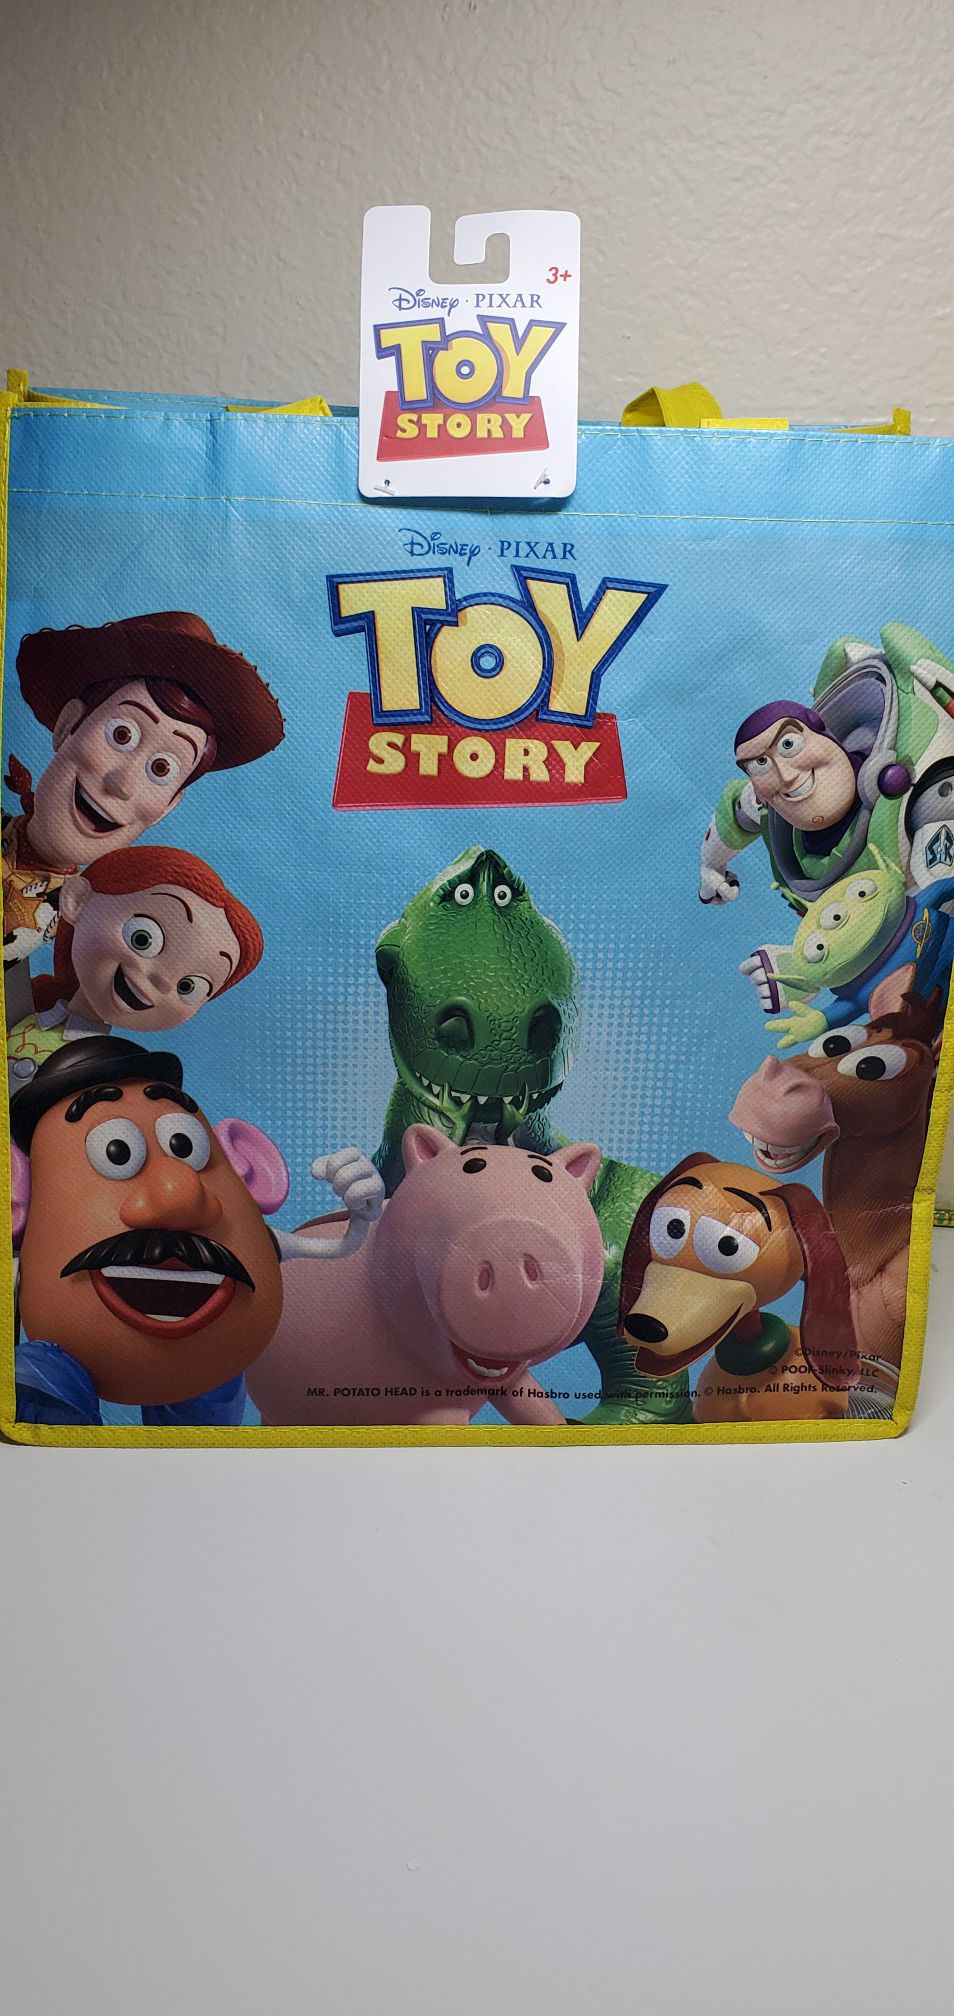 Toy Story grocery tote bags